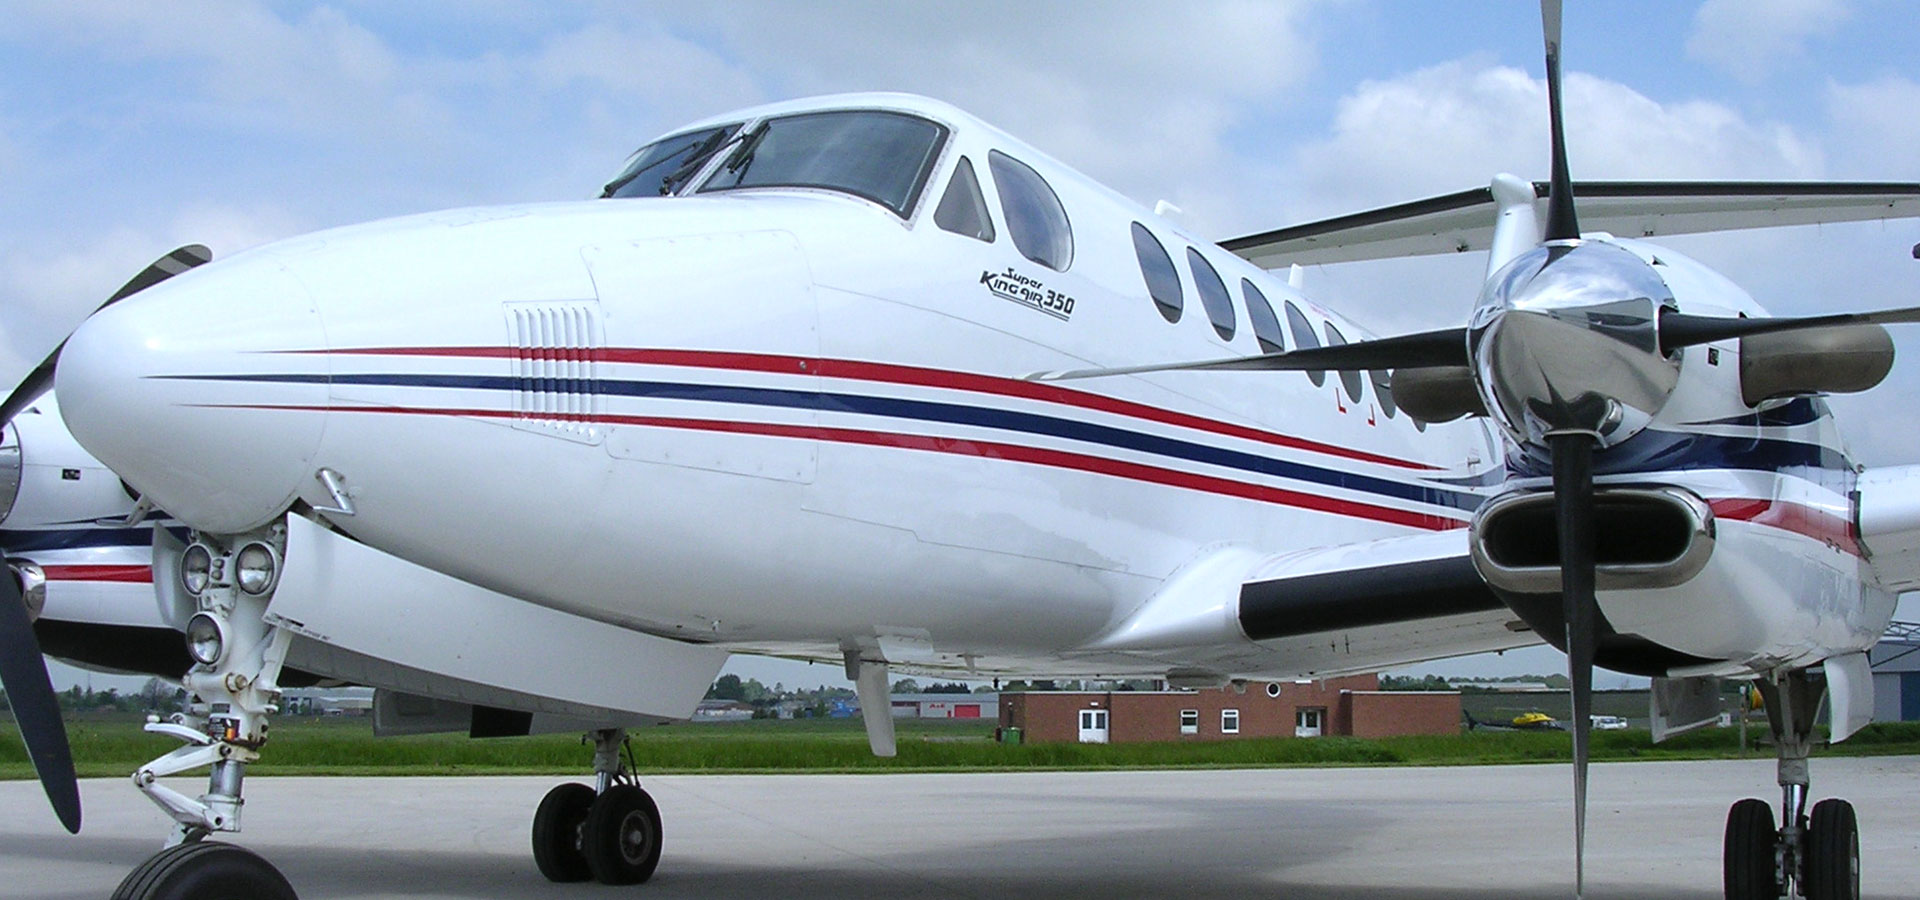 King Air aircraft parked on stand